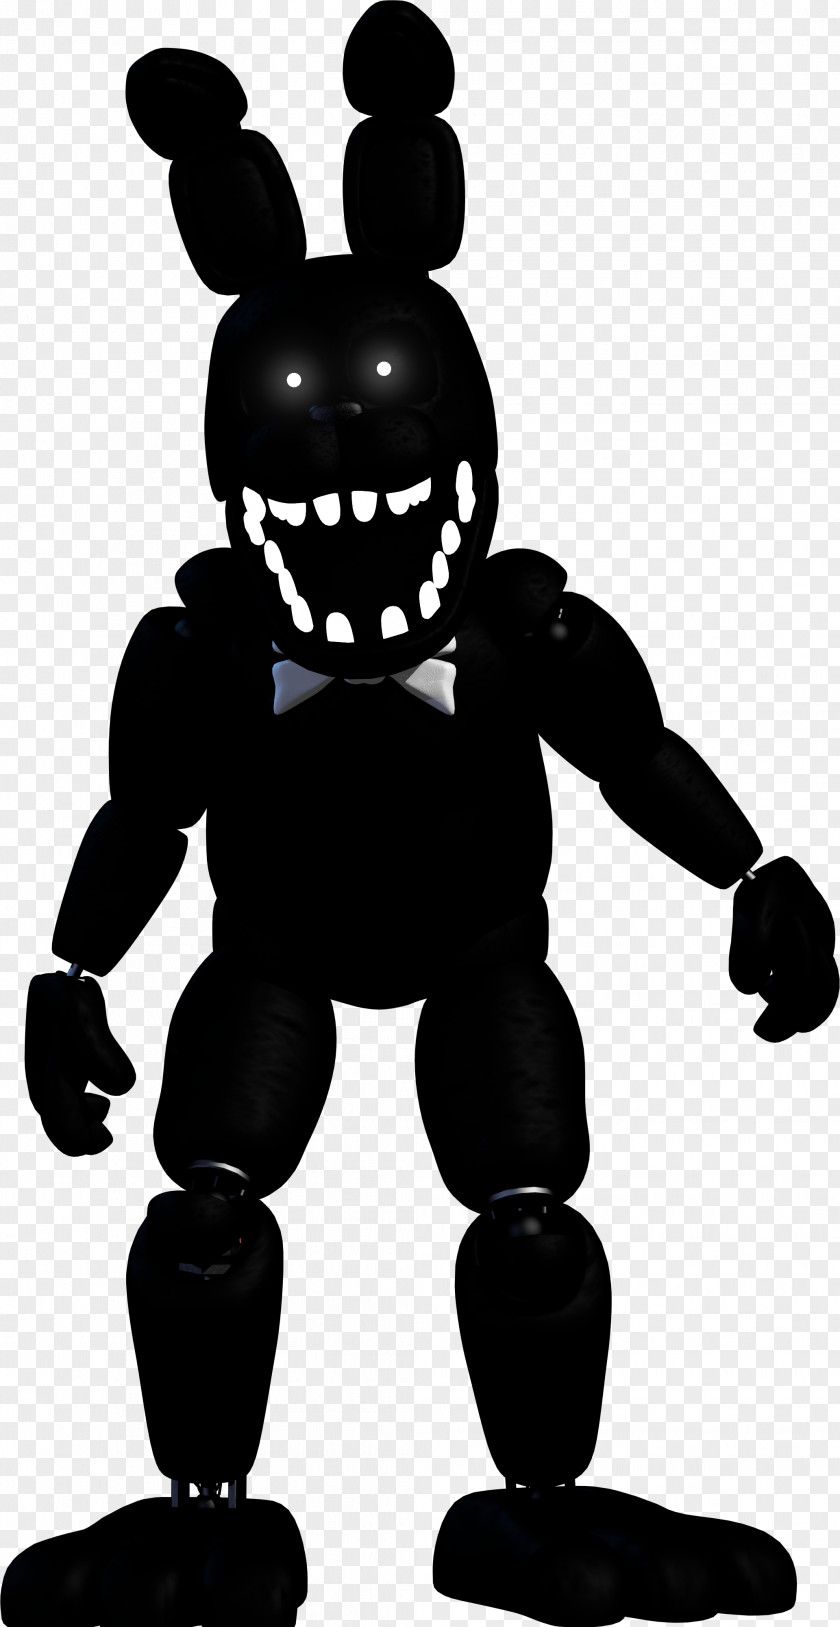 Shadow Material Five Nights At Freddy's DeviantArt Silhouette Clip Art PNG